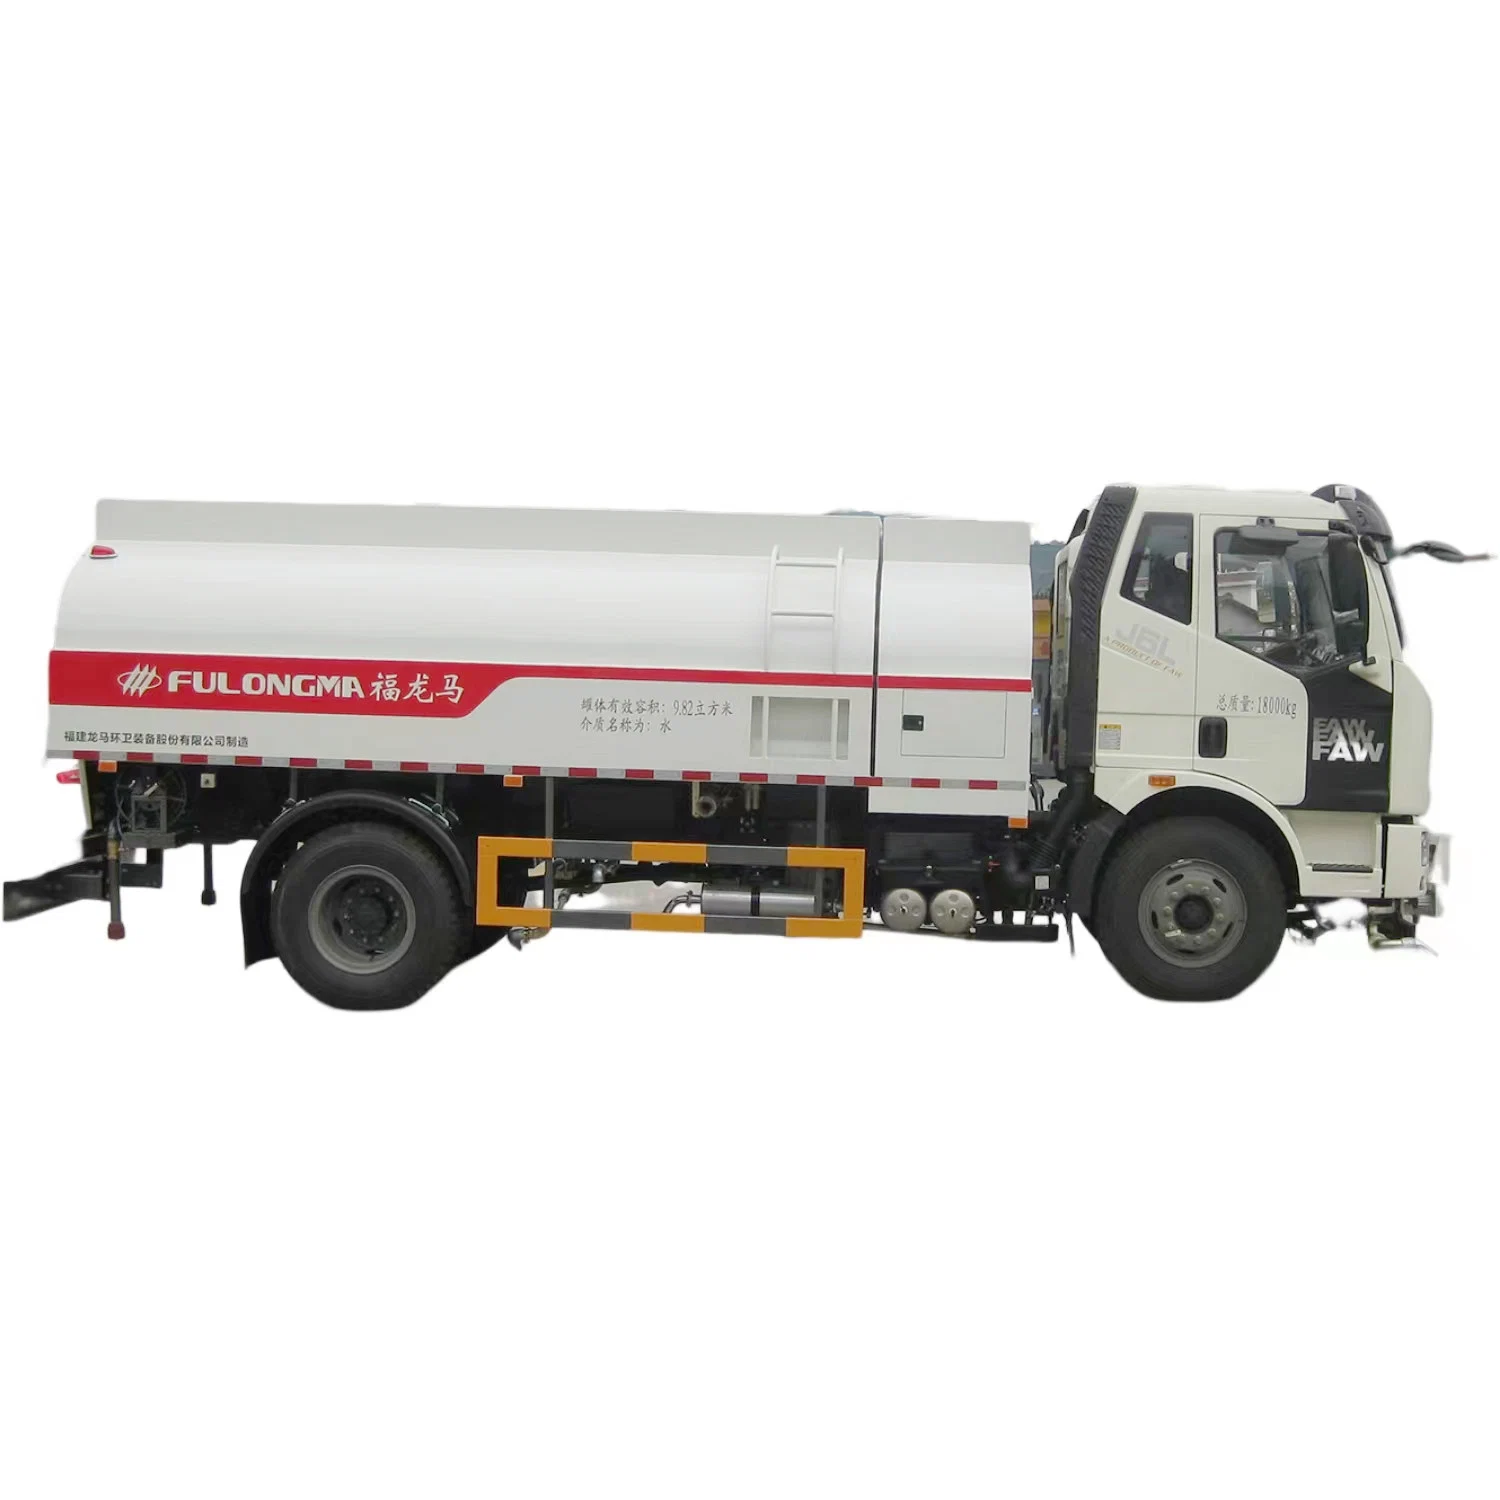 Pure Sweep-Type Diesel FAW by Sea/by Land Cart Sweeping Truck